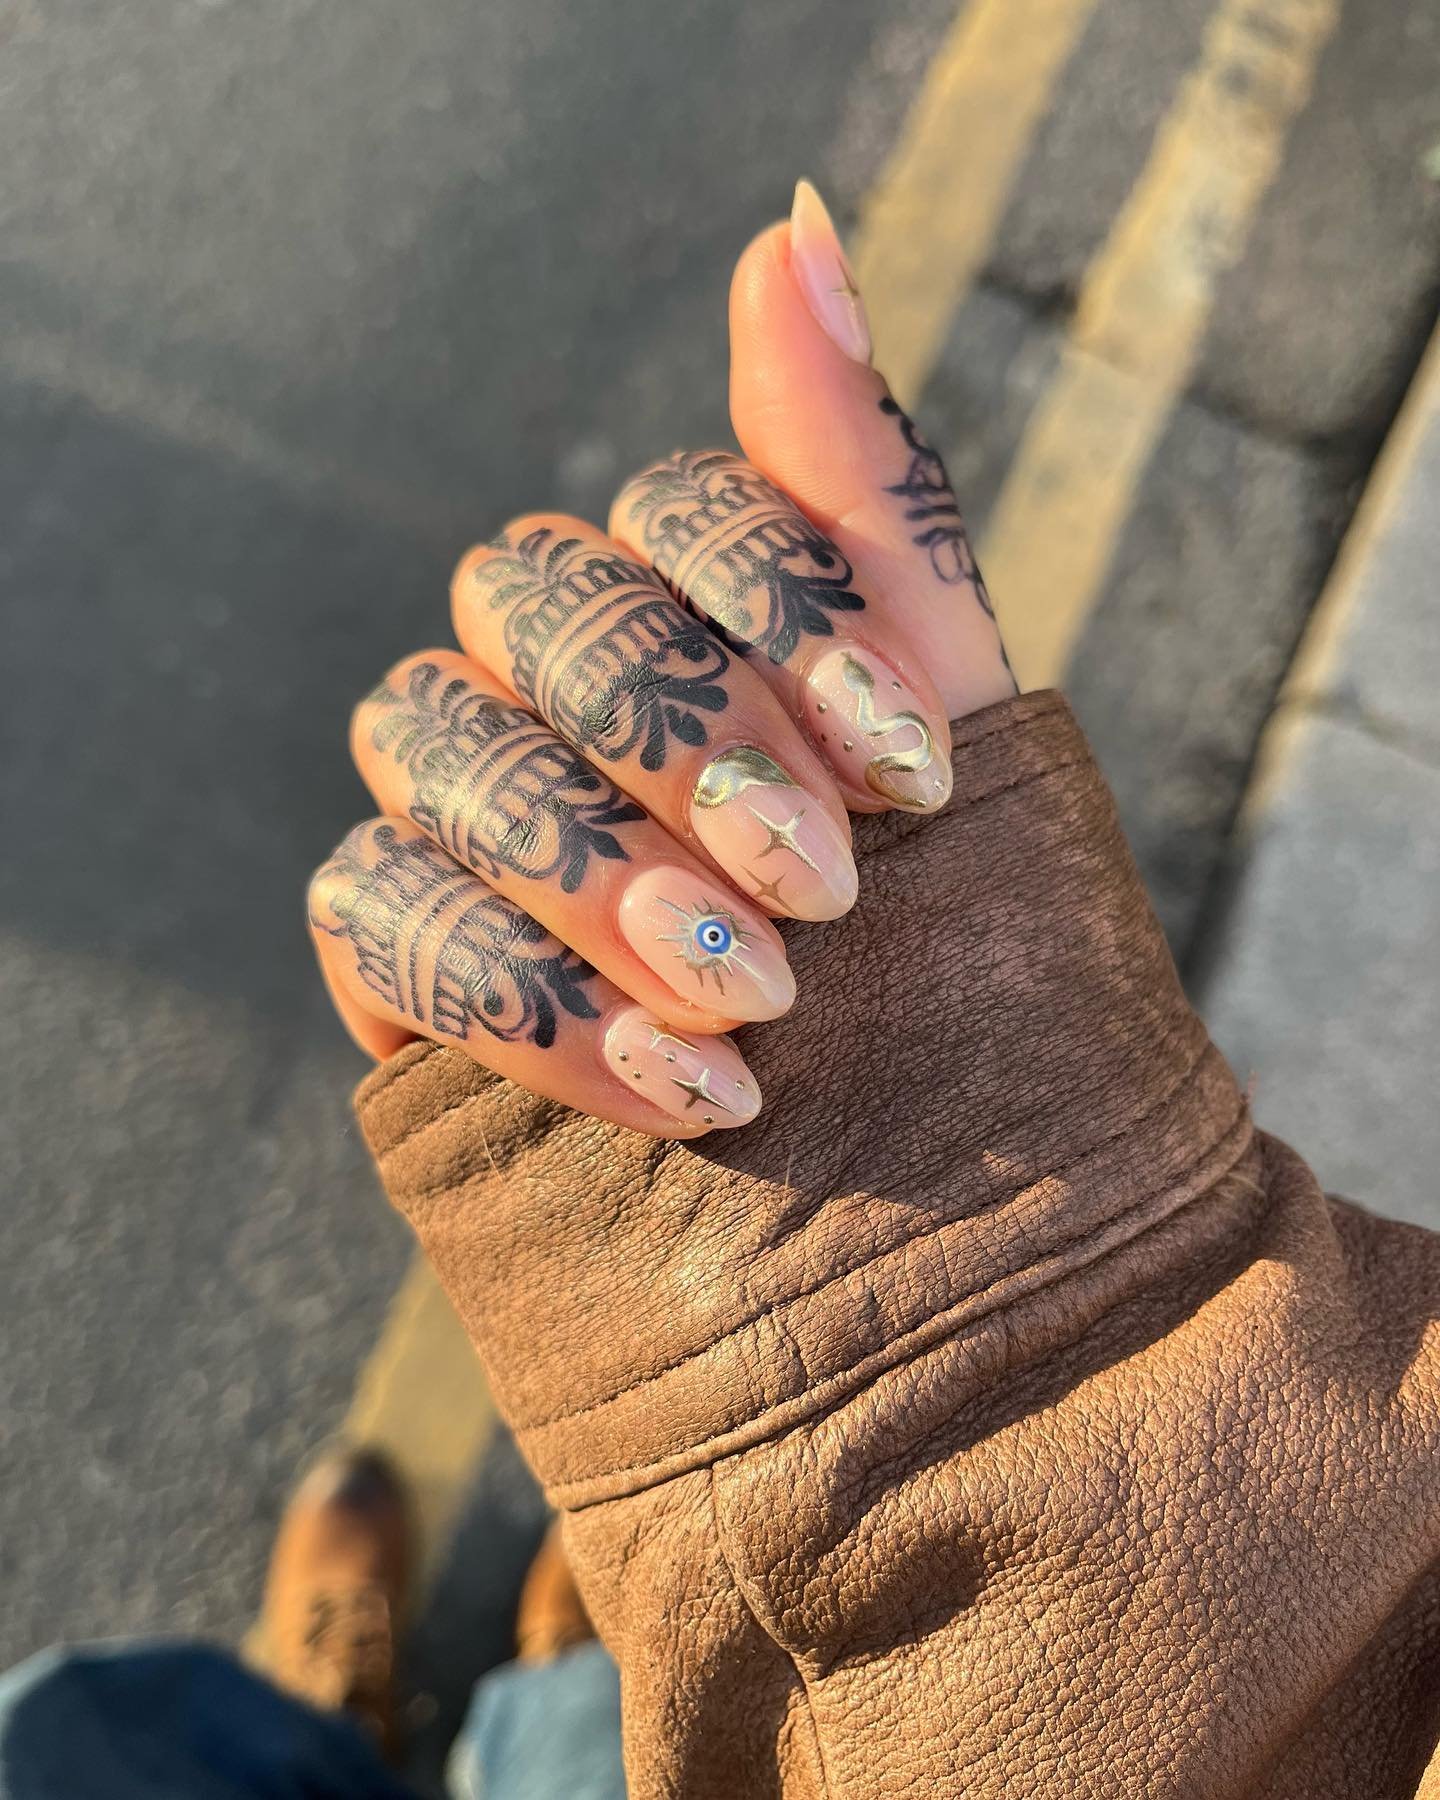 There&rsquo;s something so special about henna, especially when complemented by such INCREDIBLE nails c/o @gazebybecky 🖤🧿✨🪬